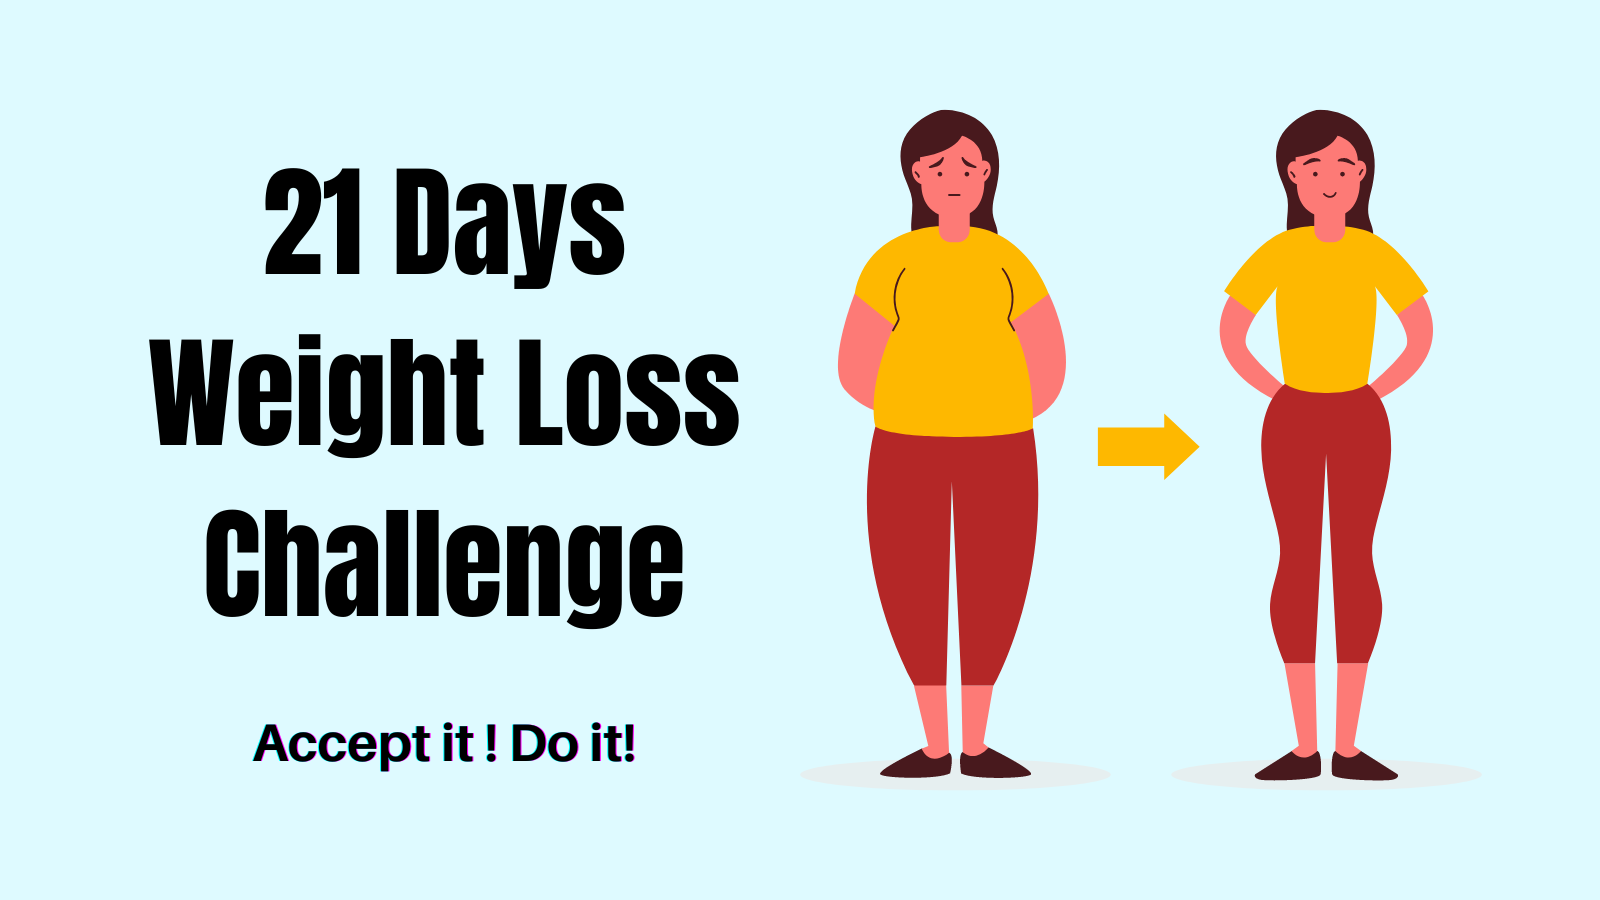 Days Weight Loss Challenge Lose Upto Kgs In February Food Fitness Fun